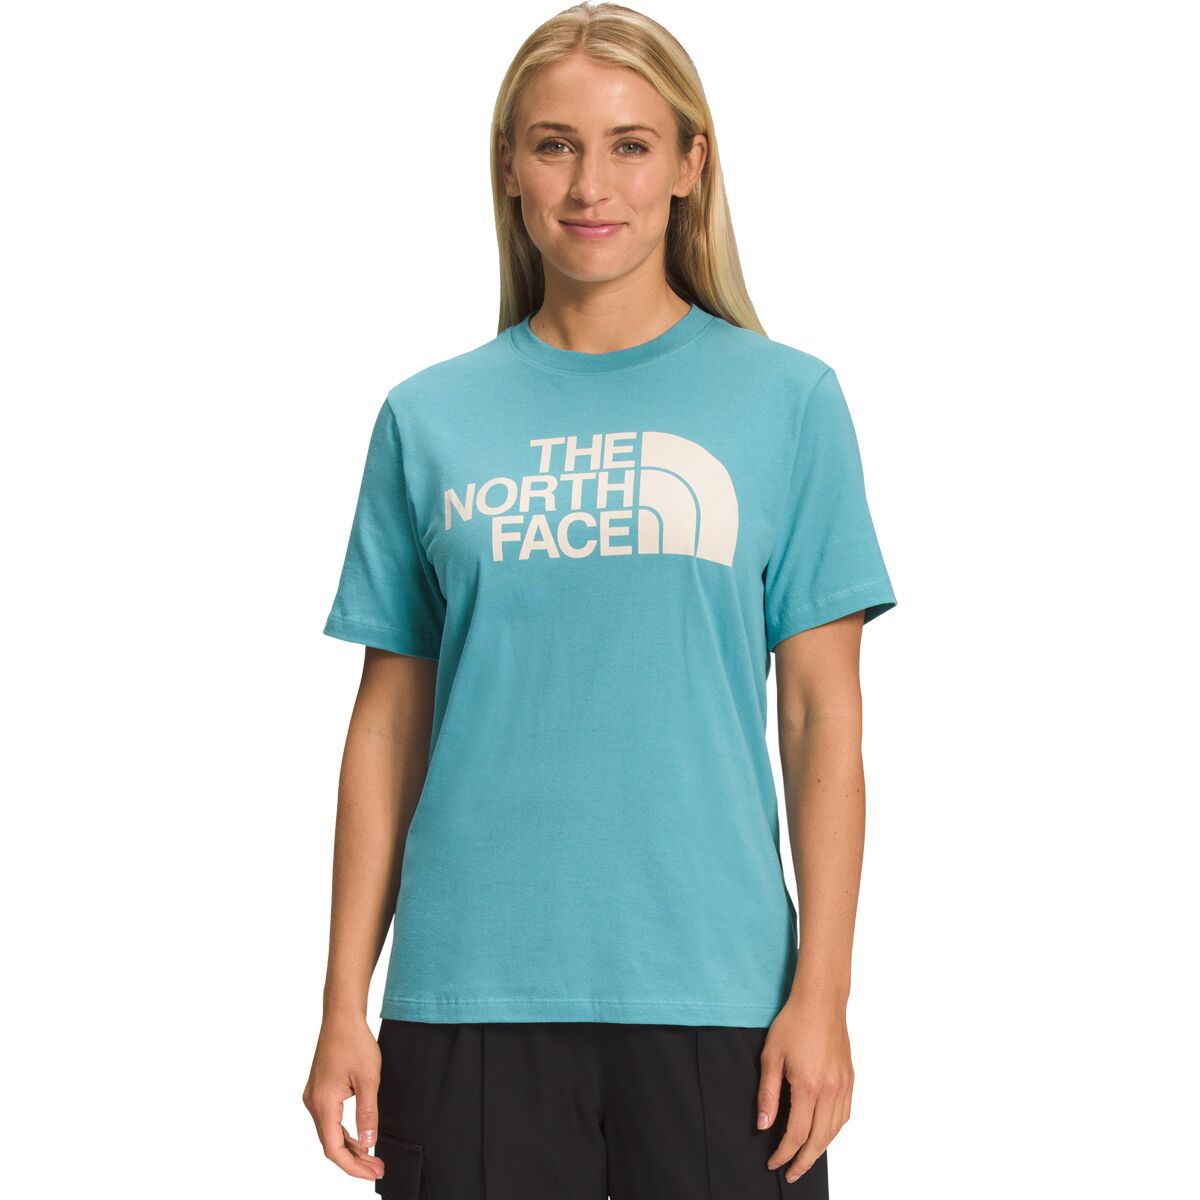 The North Face Half Dome T-Shirt - Women's